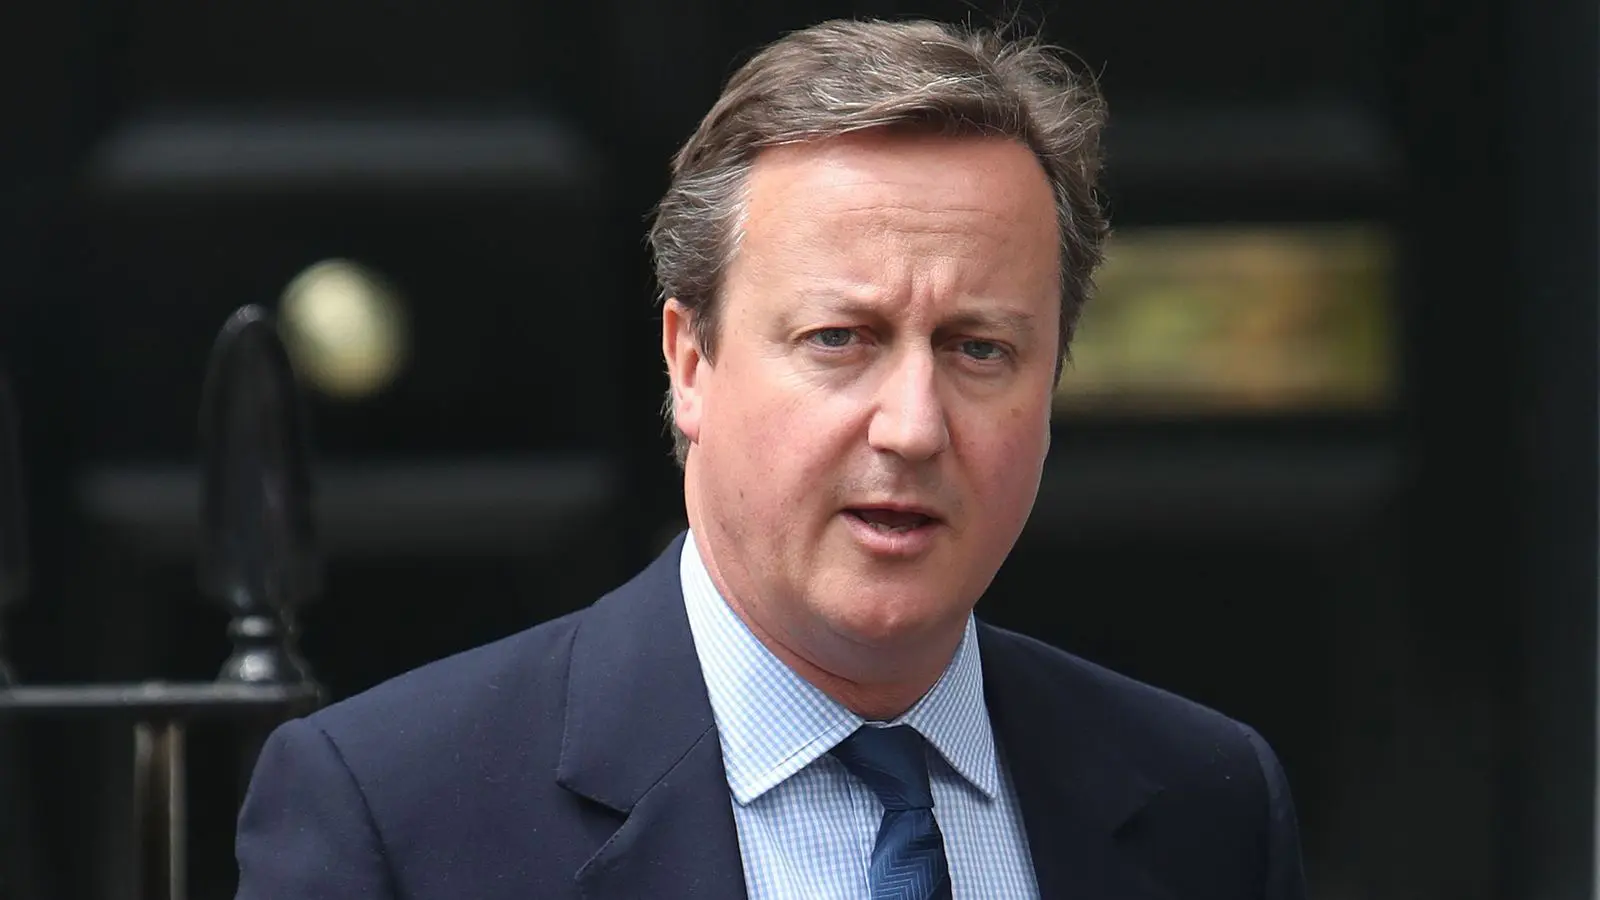 Israel: UK considering more sanctions to pre-existing 400 against Iran - Cameron